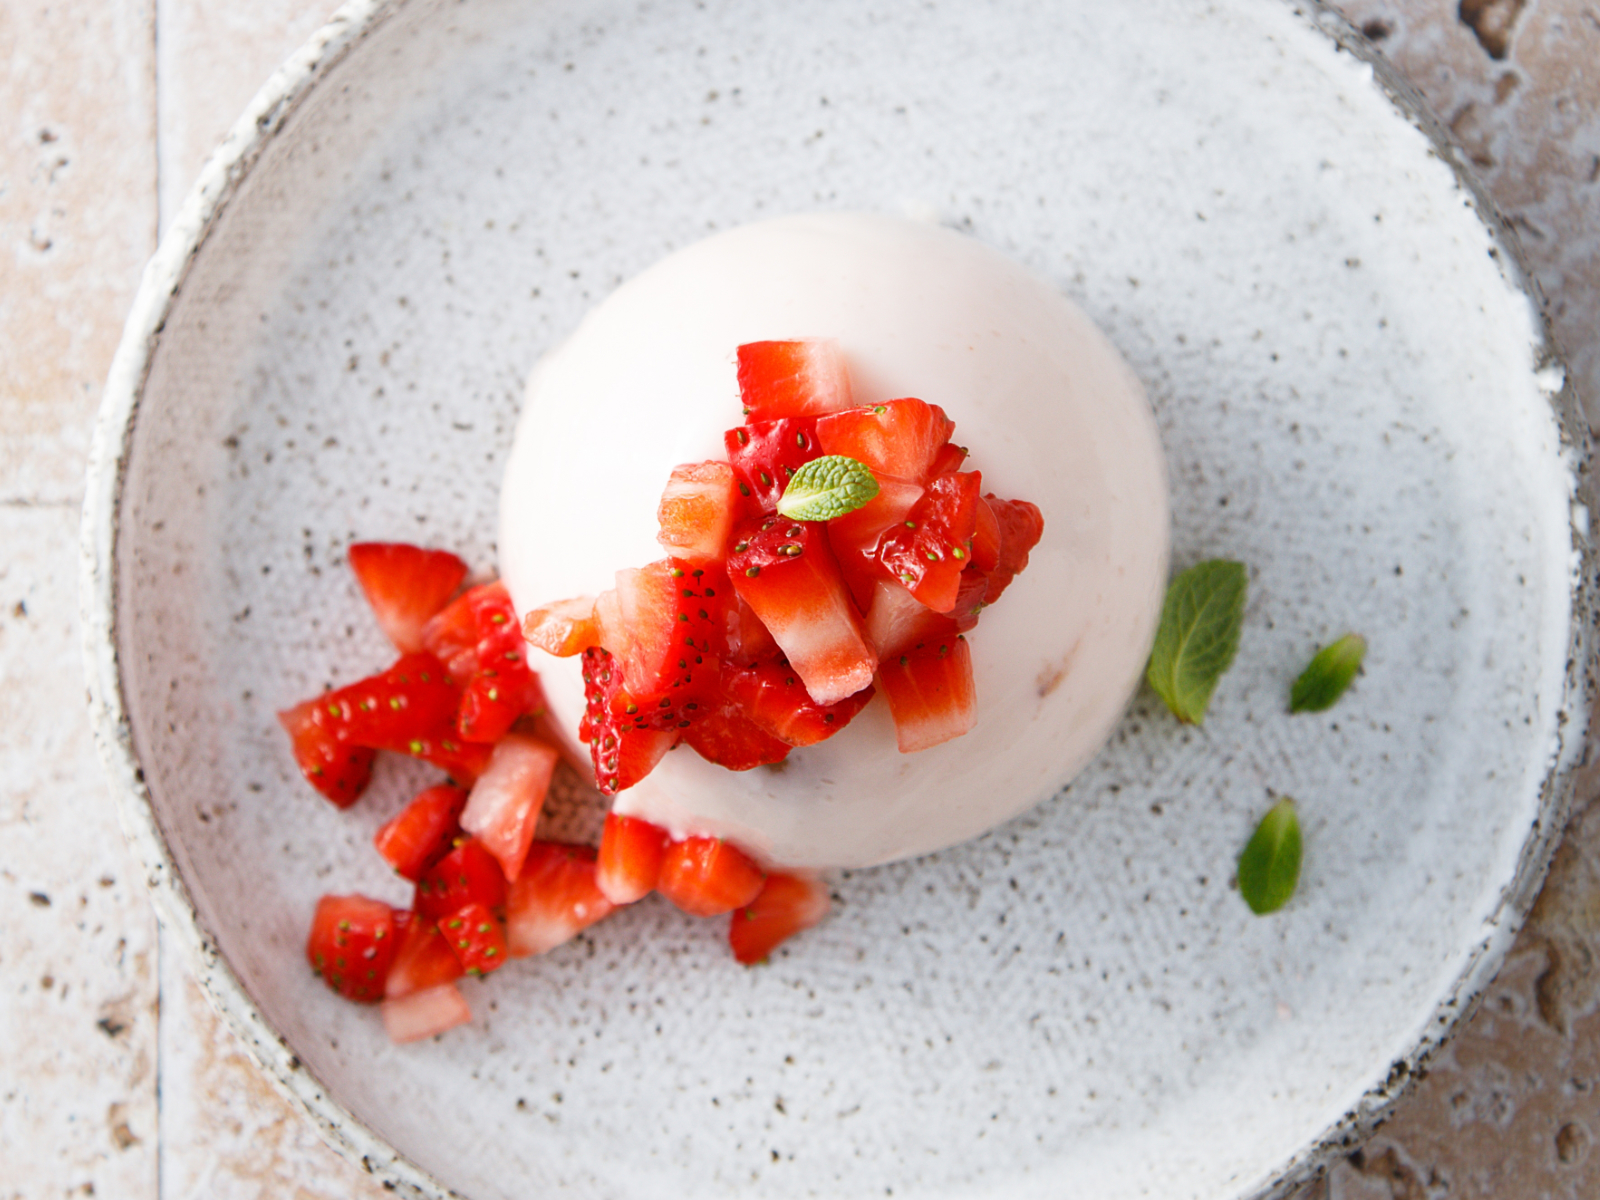 chamomile panna cotta with strawberries piled on top